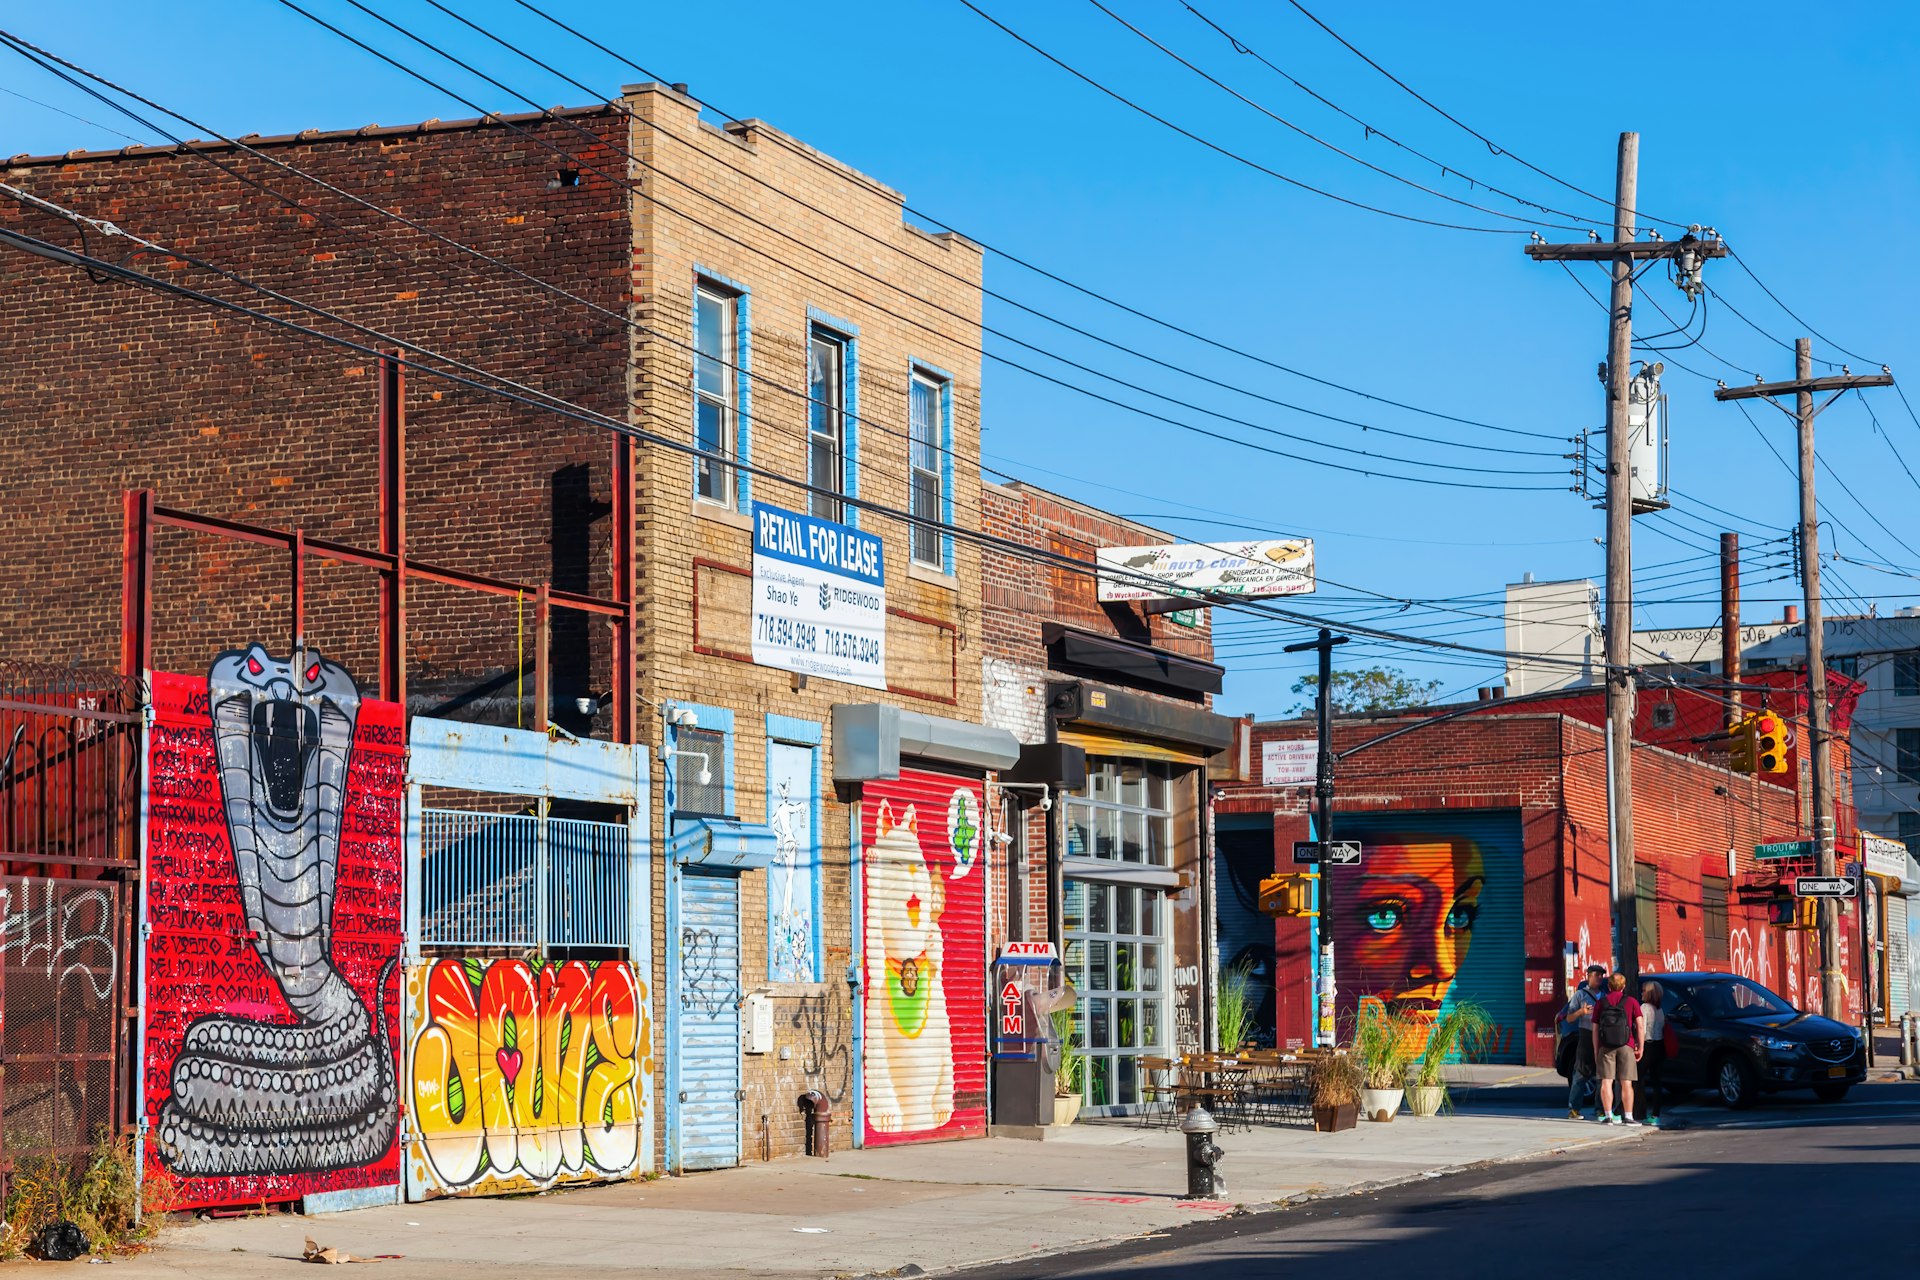 People standing on a corner in Bushwick, Brooklyn, in front of brightly painted mural art